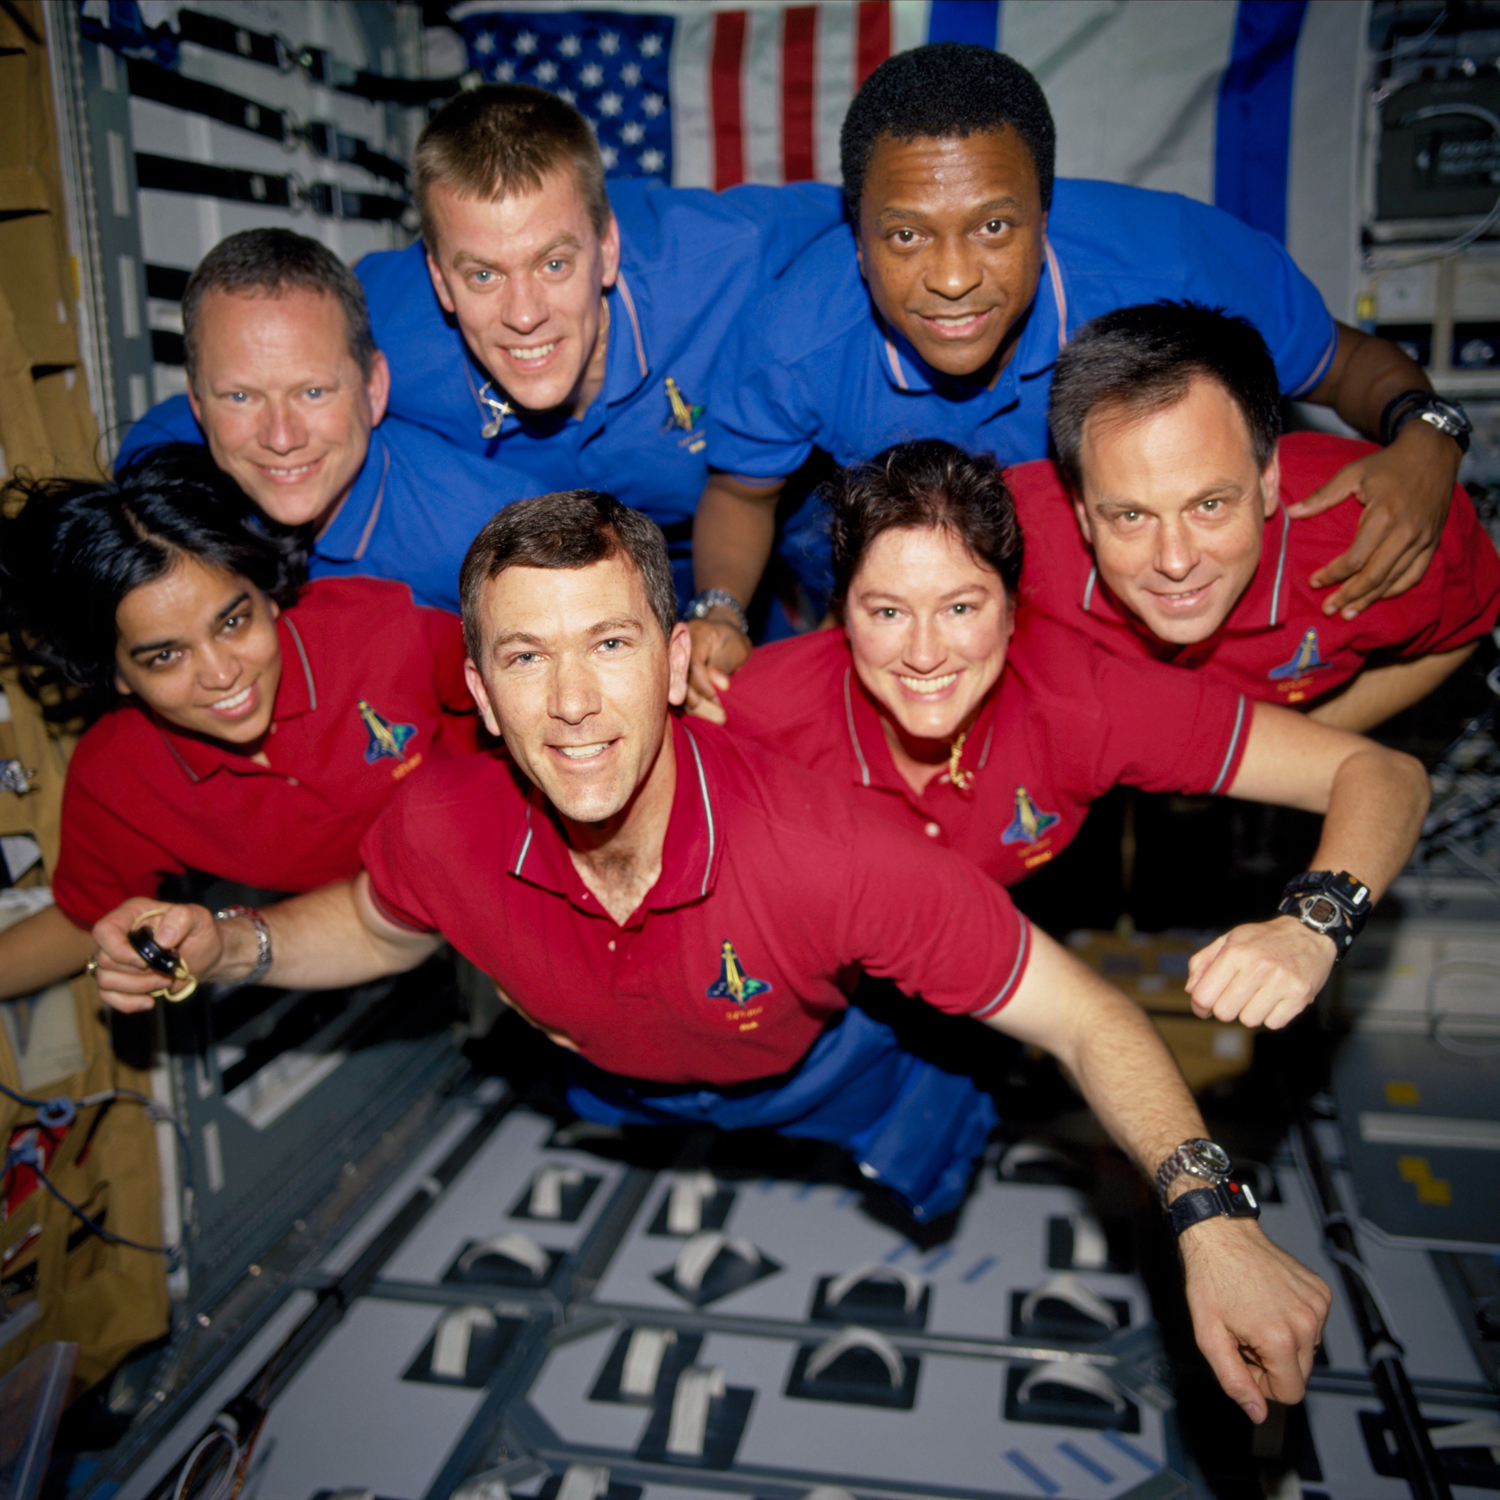 Group of astronauts wearing shirts and floating together